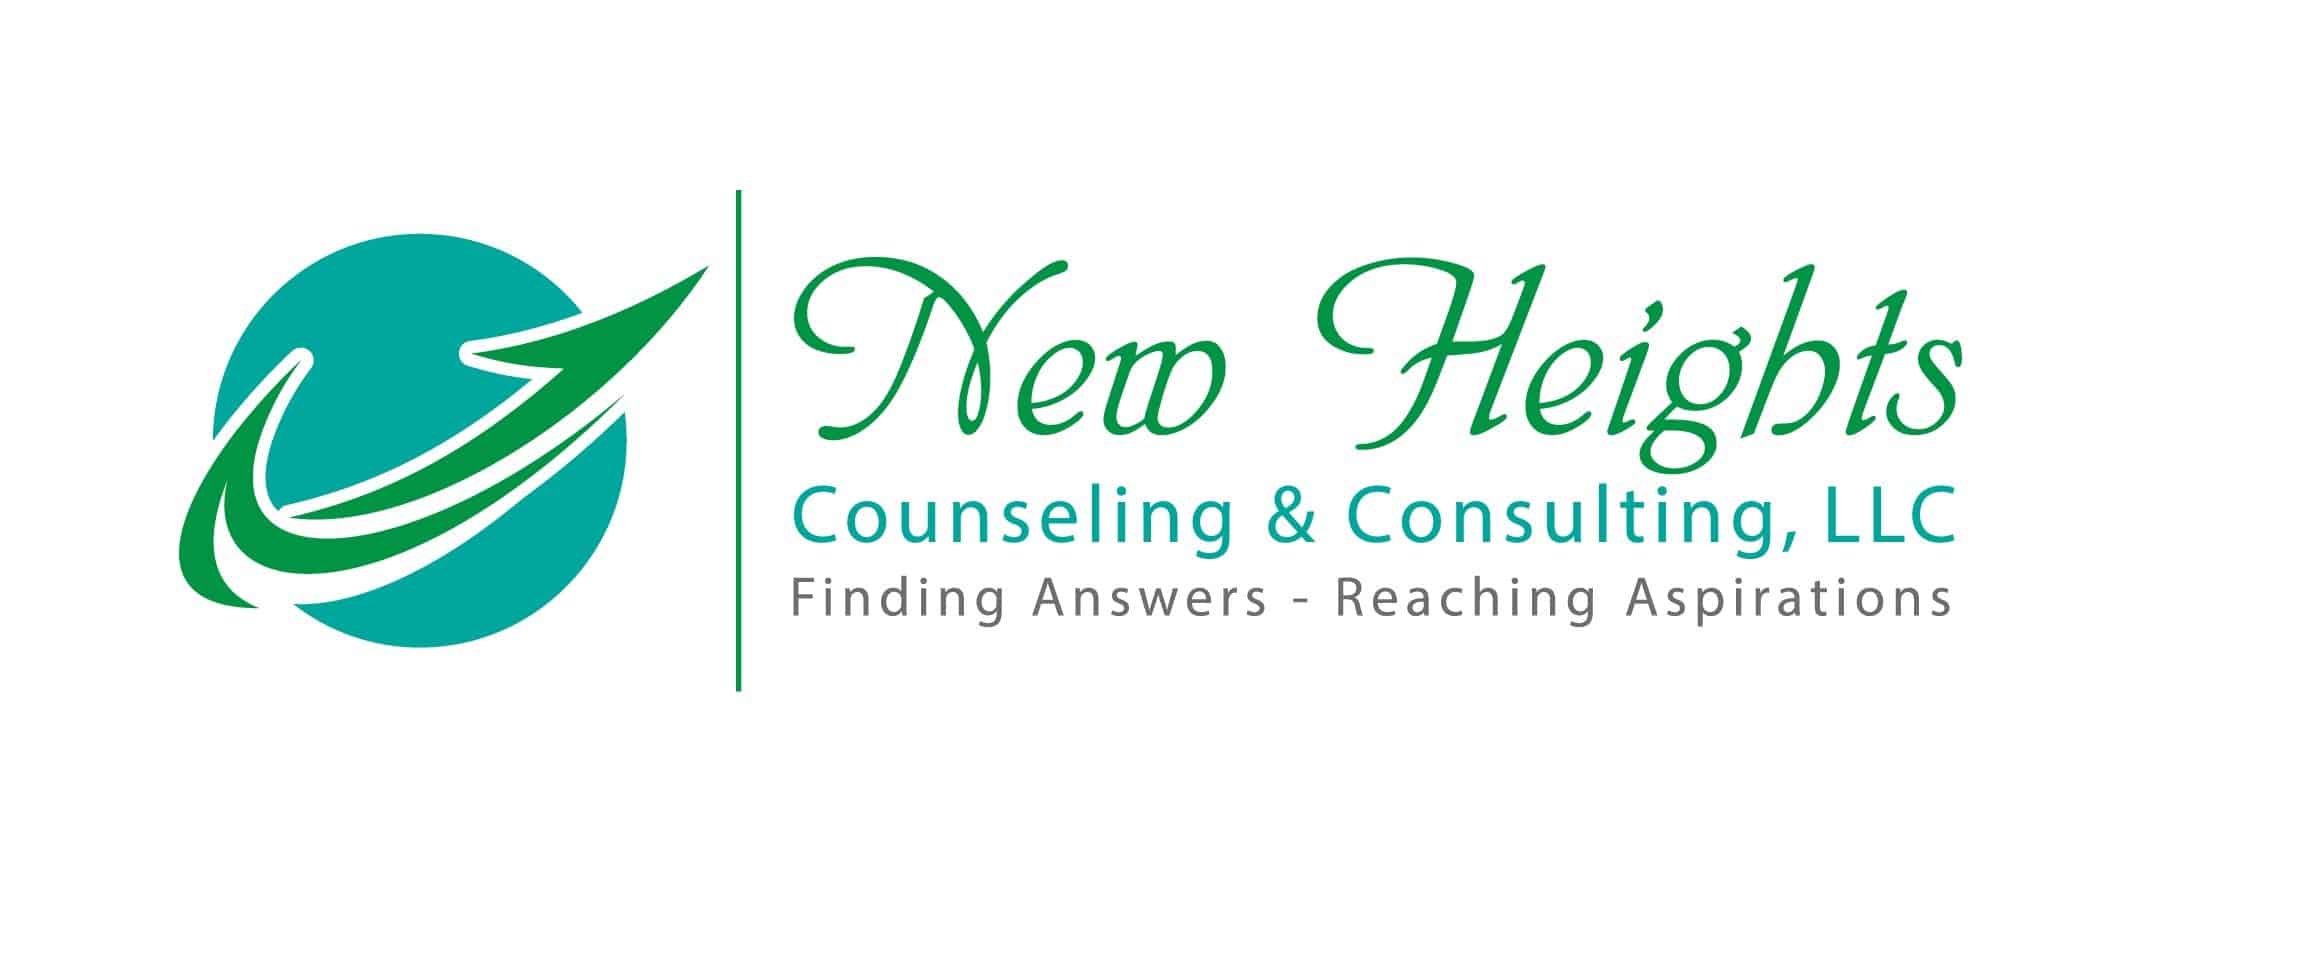 New Heights Counseling & Consulting, LLC